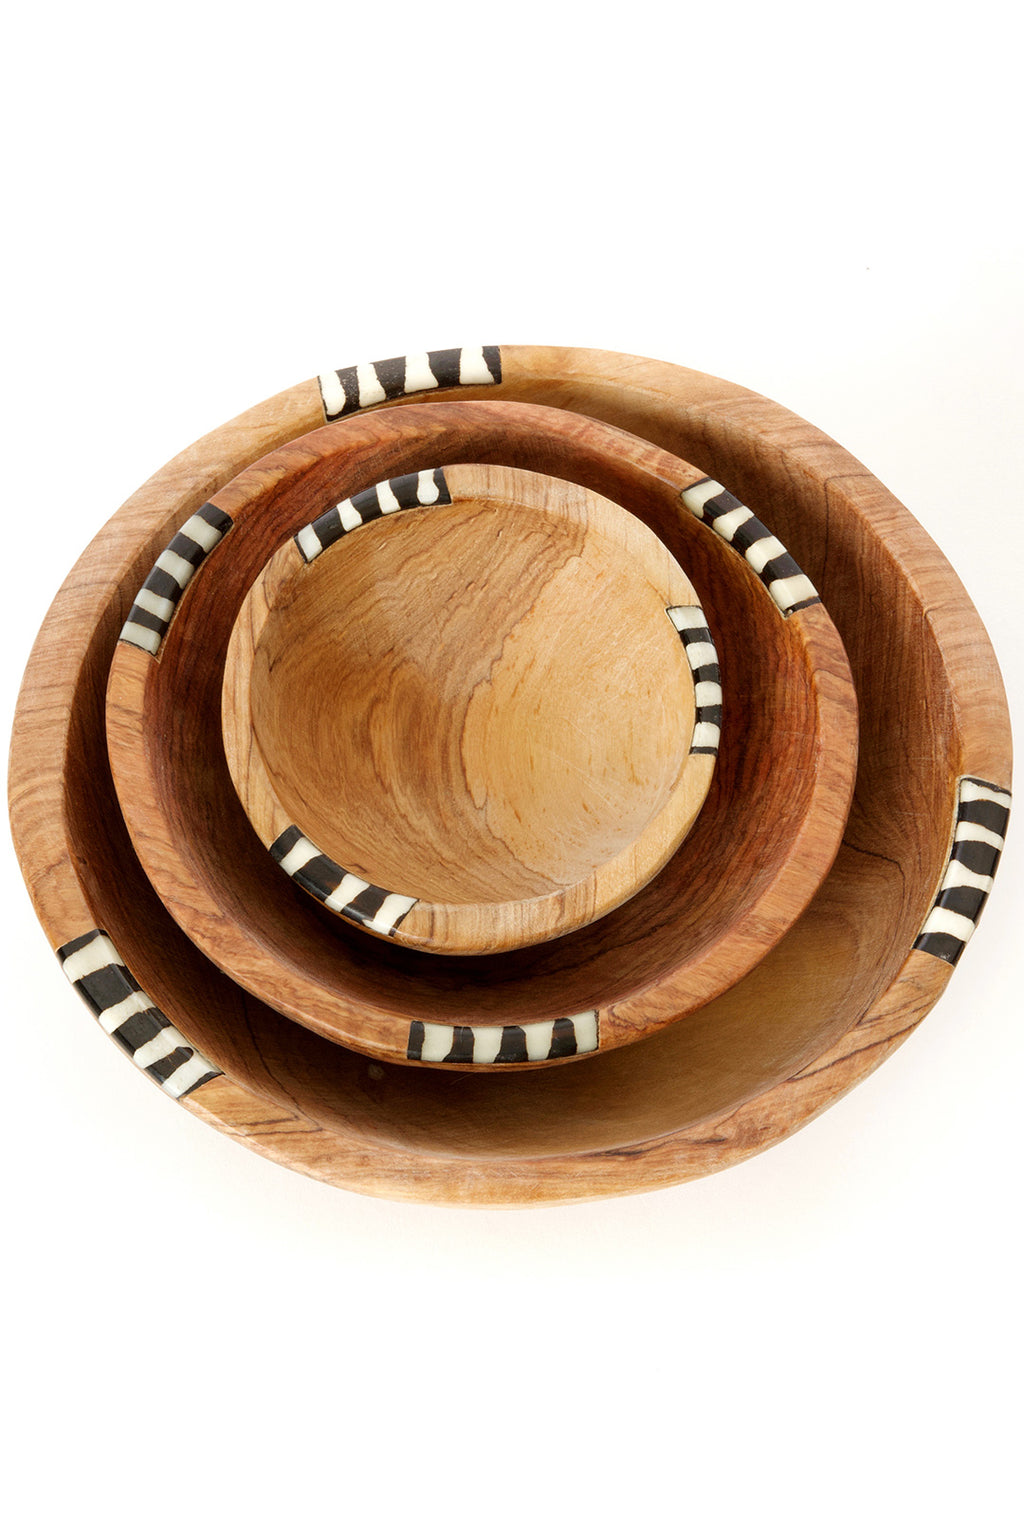 Set of Three Wild Olive Wood Bowls with Dyed Bone Inlay Default Title